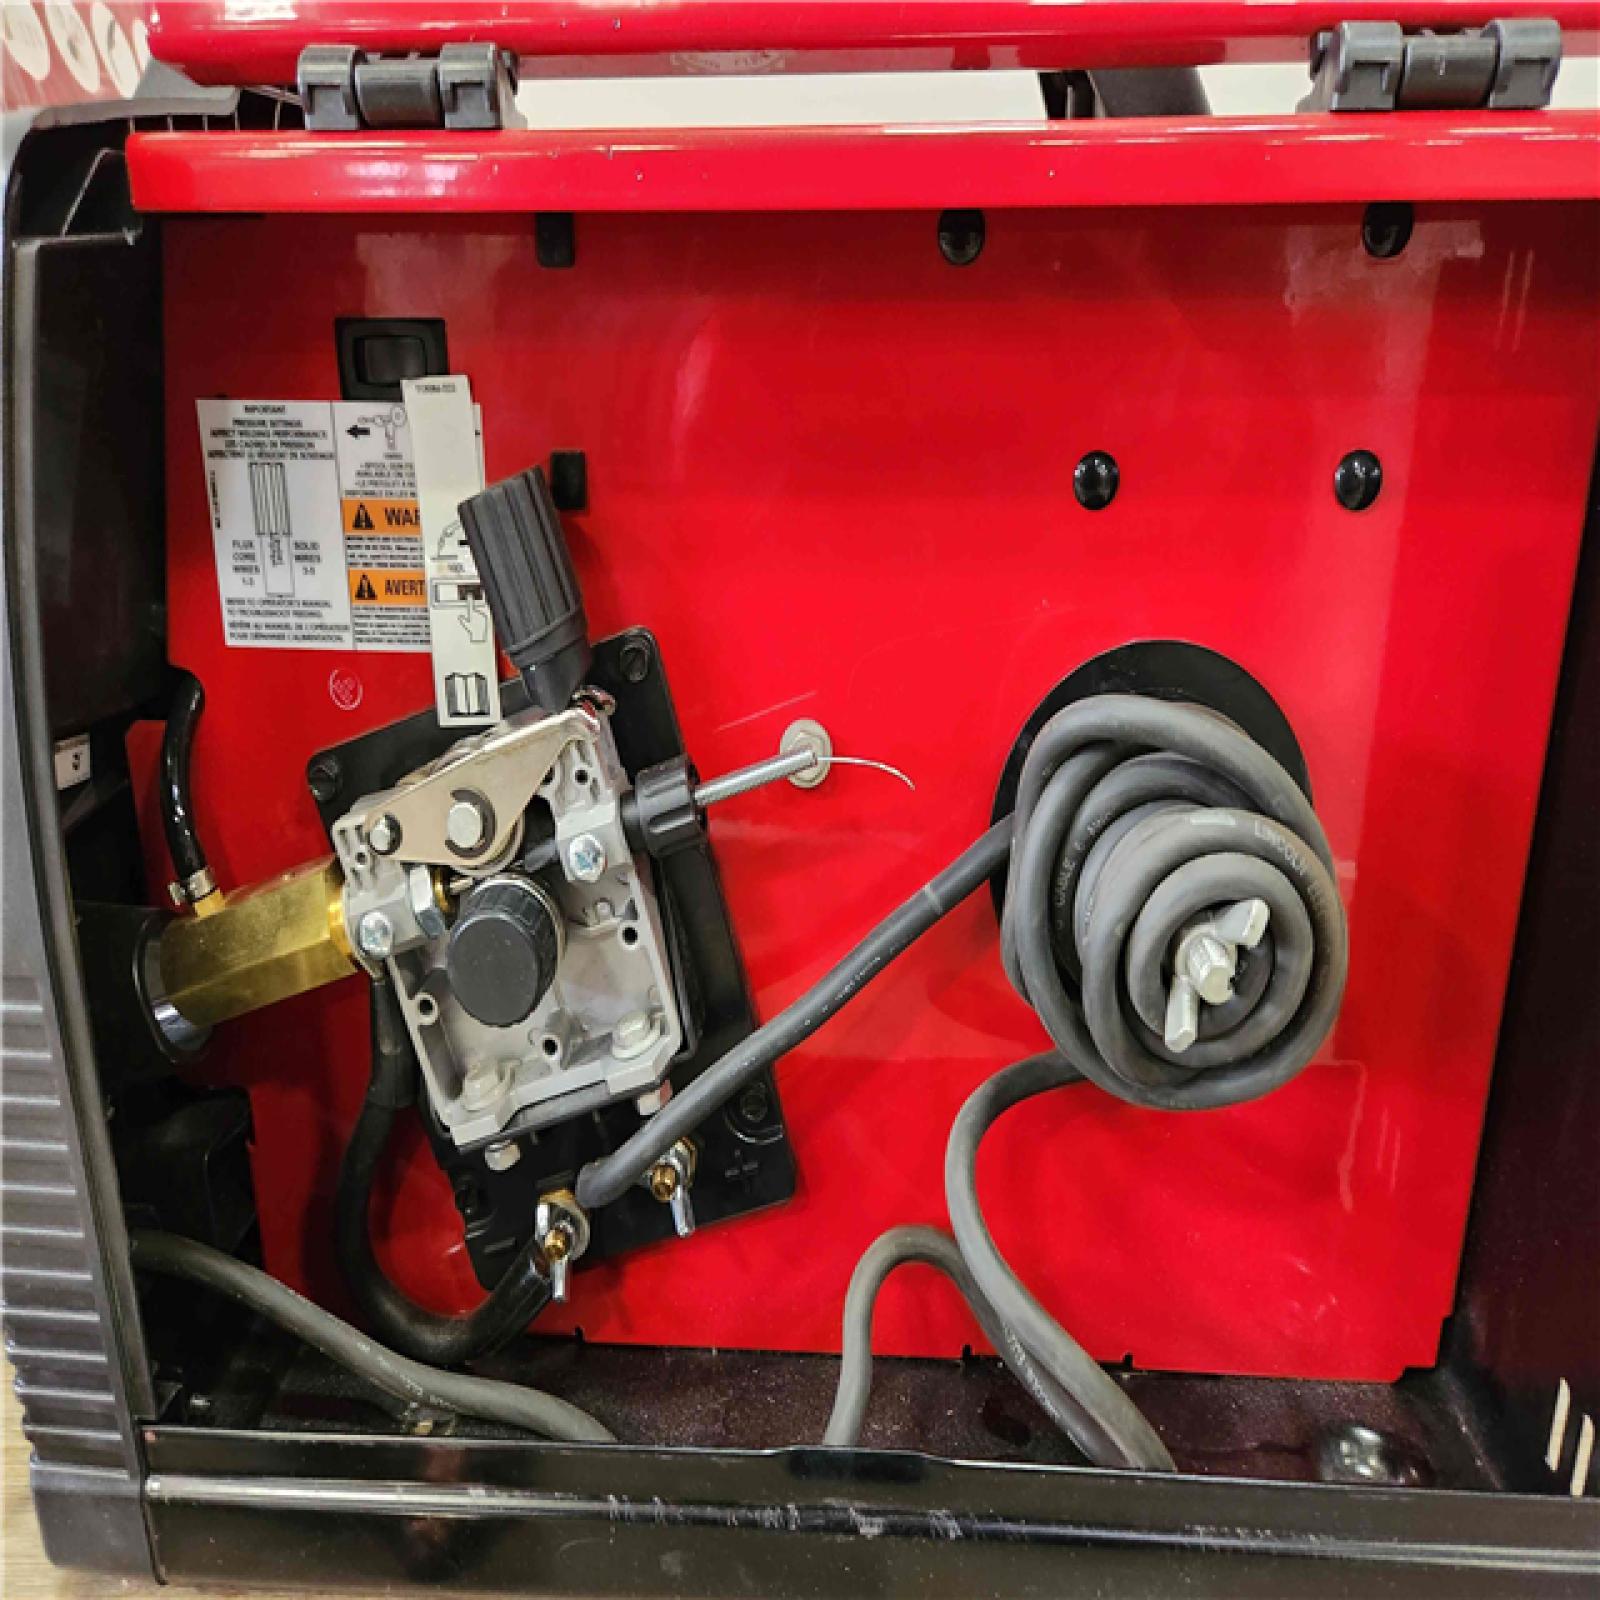 Phoenix Location Like NEW Condition Lincoln Electric Weld-Pak 180 Amp MIG Flux-Core Wire Feed Welder, 230V, Aluminum Welder with Spool Gun sold separately